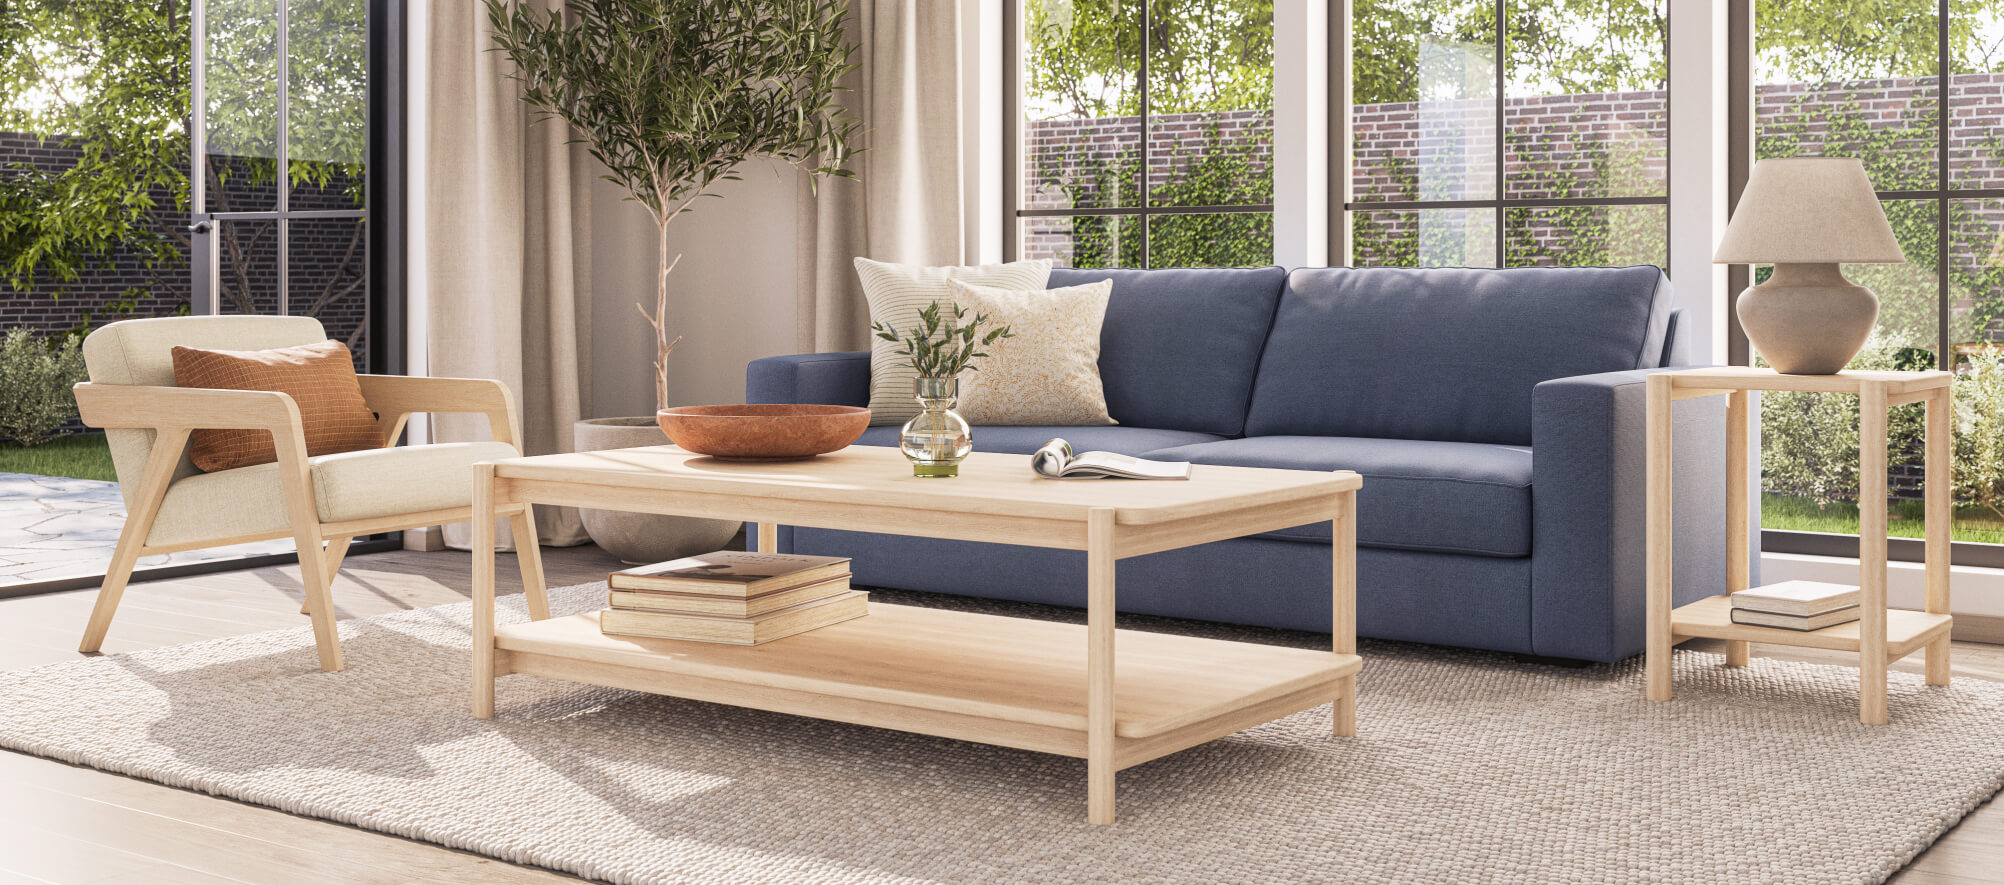 Sofas For A More Sustainable Home Medley